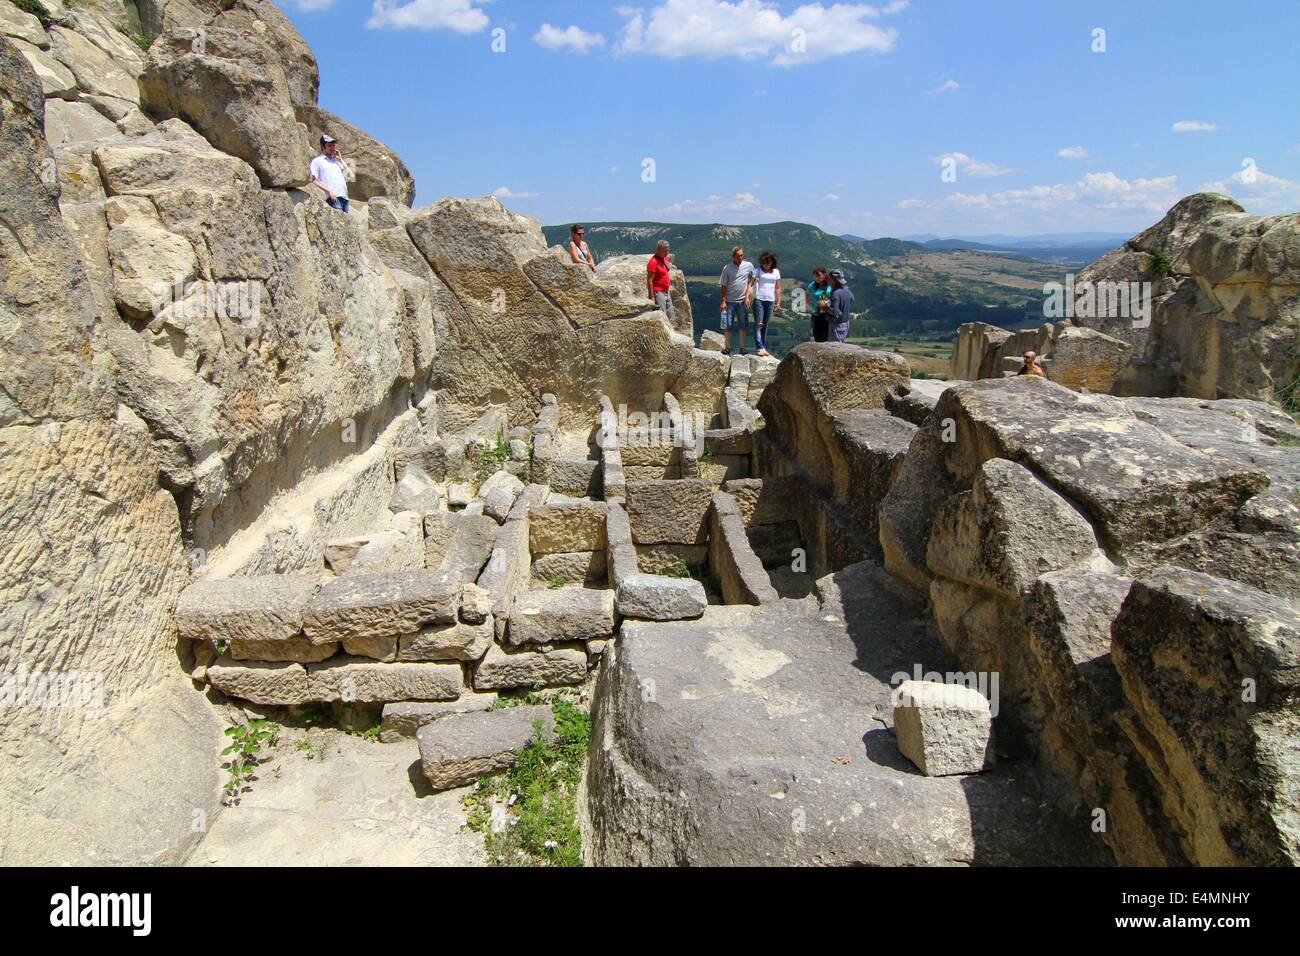 July 13, 2014 - Perperikon, BGR - People attend at the Thracian ancient monumental  archaeological complex Perperikon south-east of the Bulgarian capital Sofia, Sunday, July, 13, 2014. Perperikon is one of the most ancient monumental megalithic structures, entirely carved into the rocks as is one of the most popular tourist destinations in Bulgaria. Religious activity at the top of the cliff began in the 5th century BC. It is associated with the beliefs of the Copper Age people, who started the cult of the sun god. Here they established the first sanctuary and started leaving food containers f Stock Photo